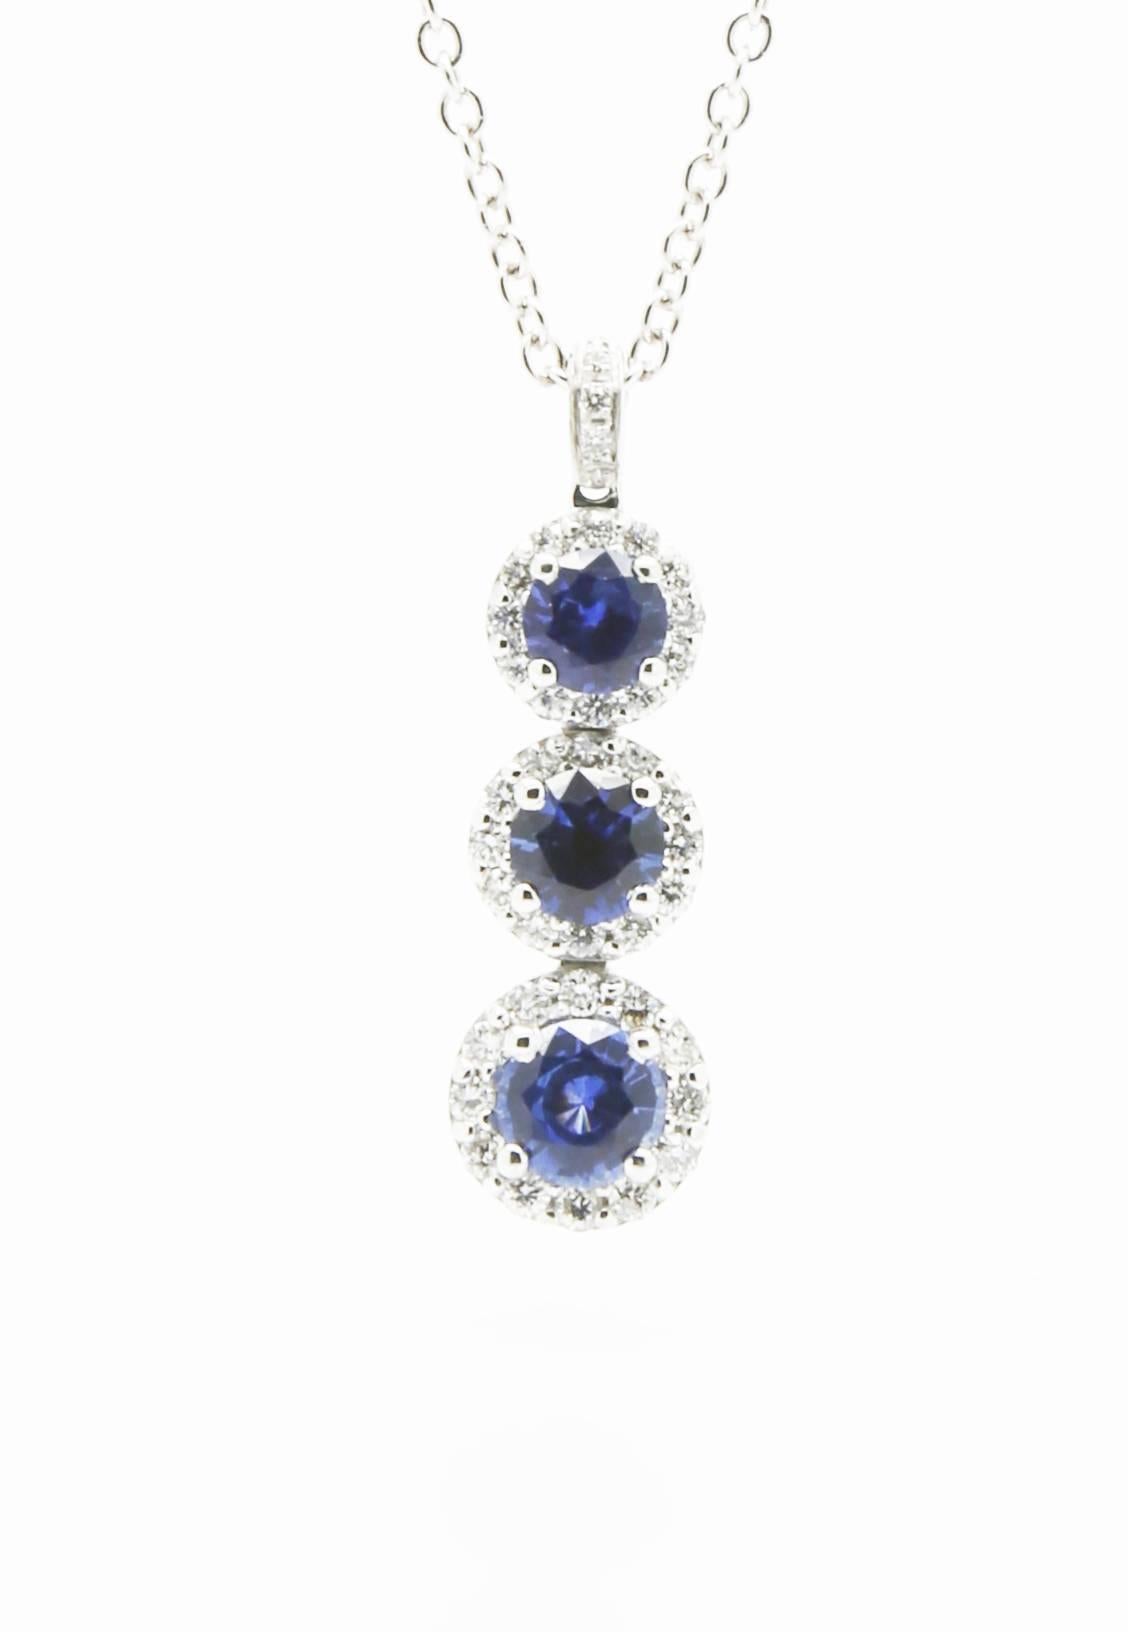 FERRUCCI blue sapphire necklace pendant for a total of 1.24 carats, and white diamonds for 0.40 carats, hand made in 18k white gold, 16 inches chain